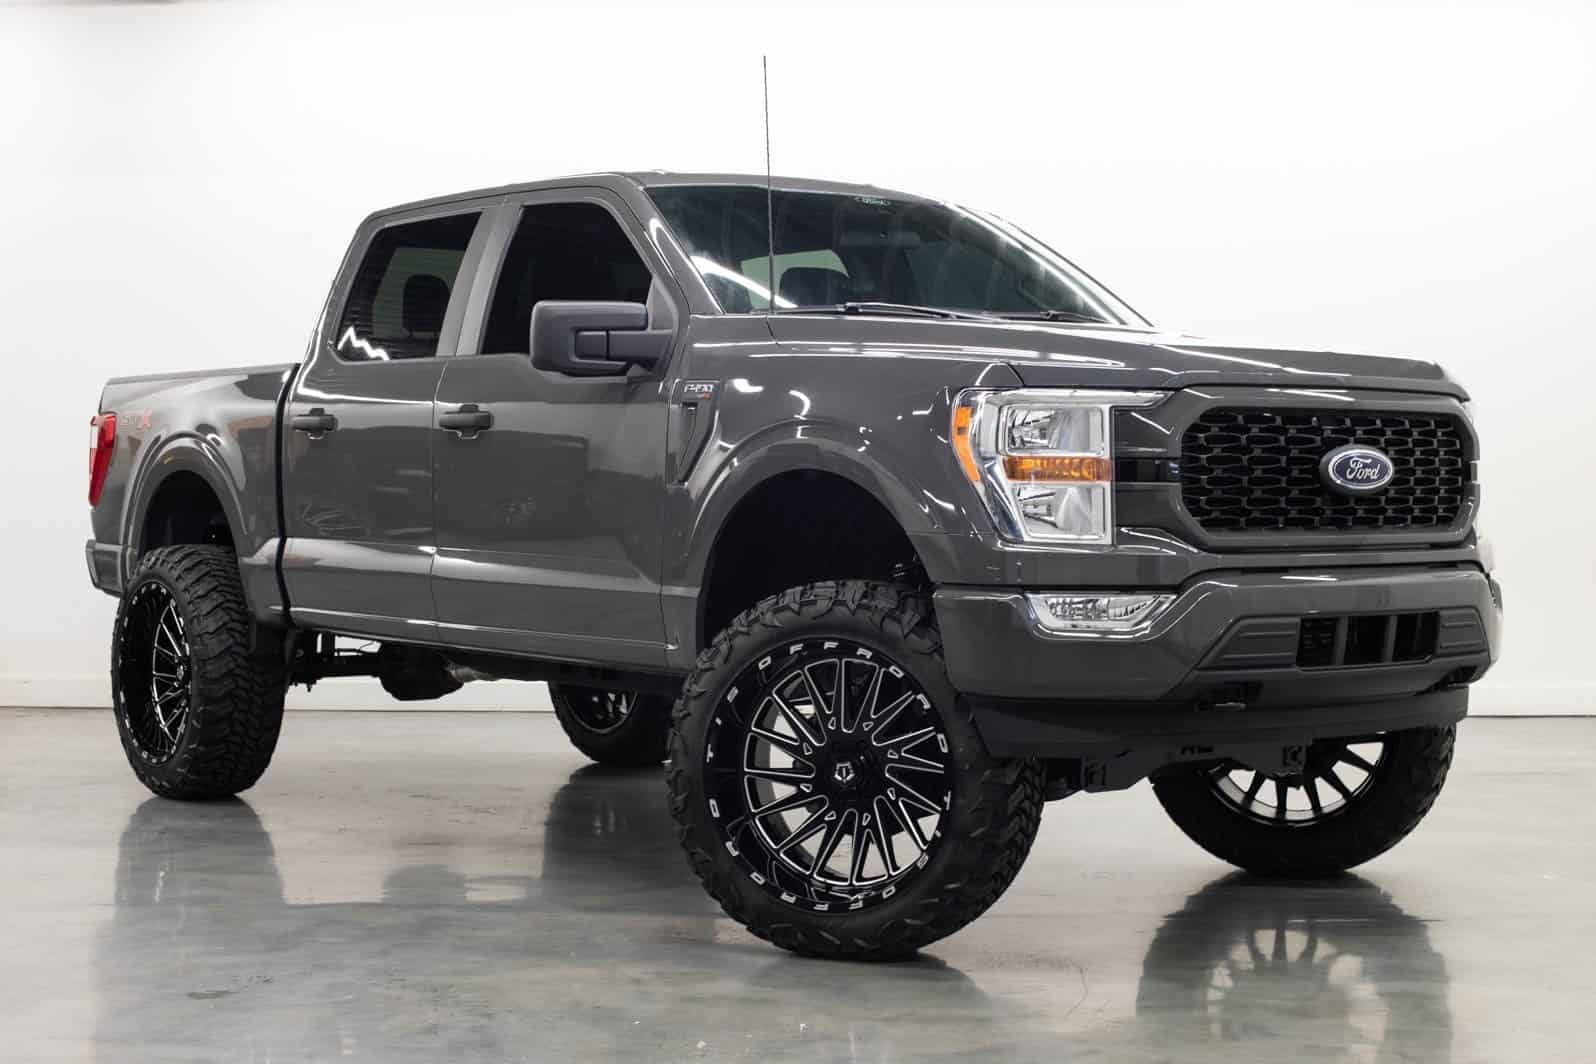 Lifted Ford Trucks for Sale